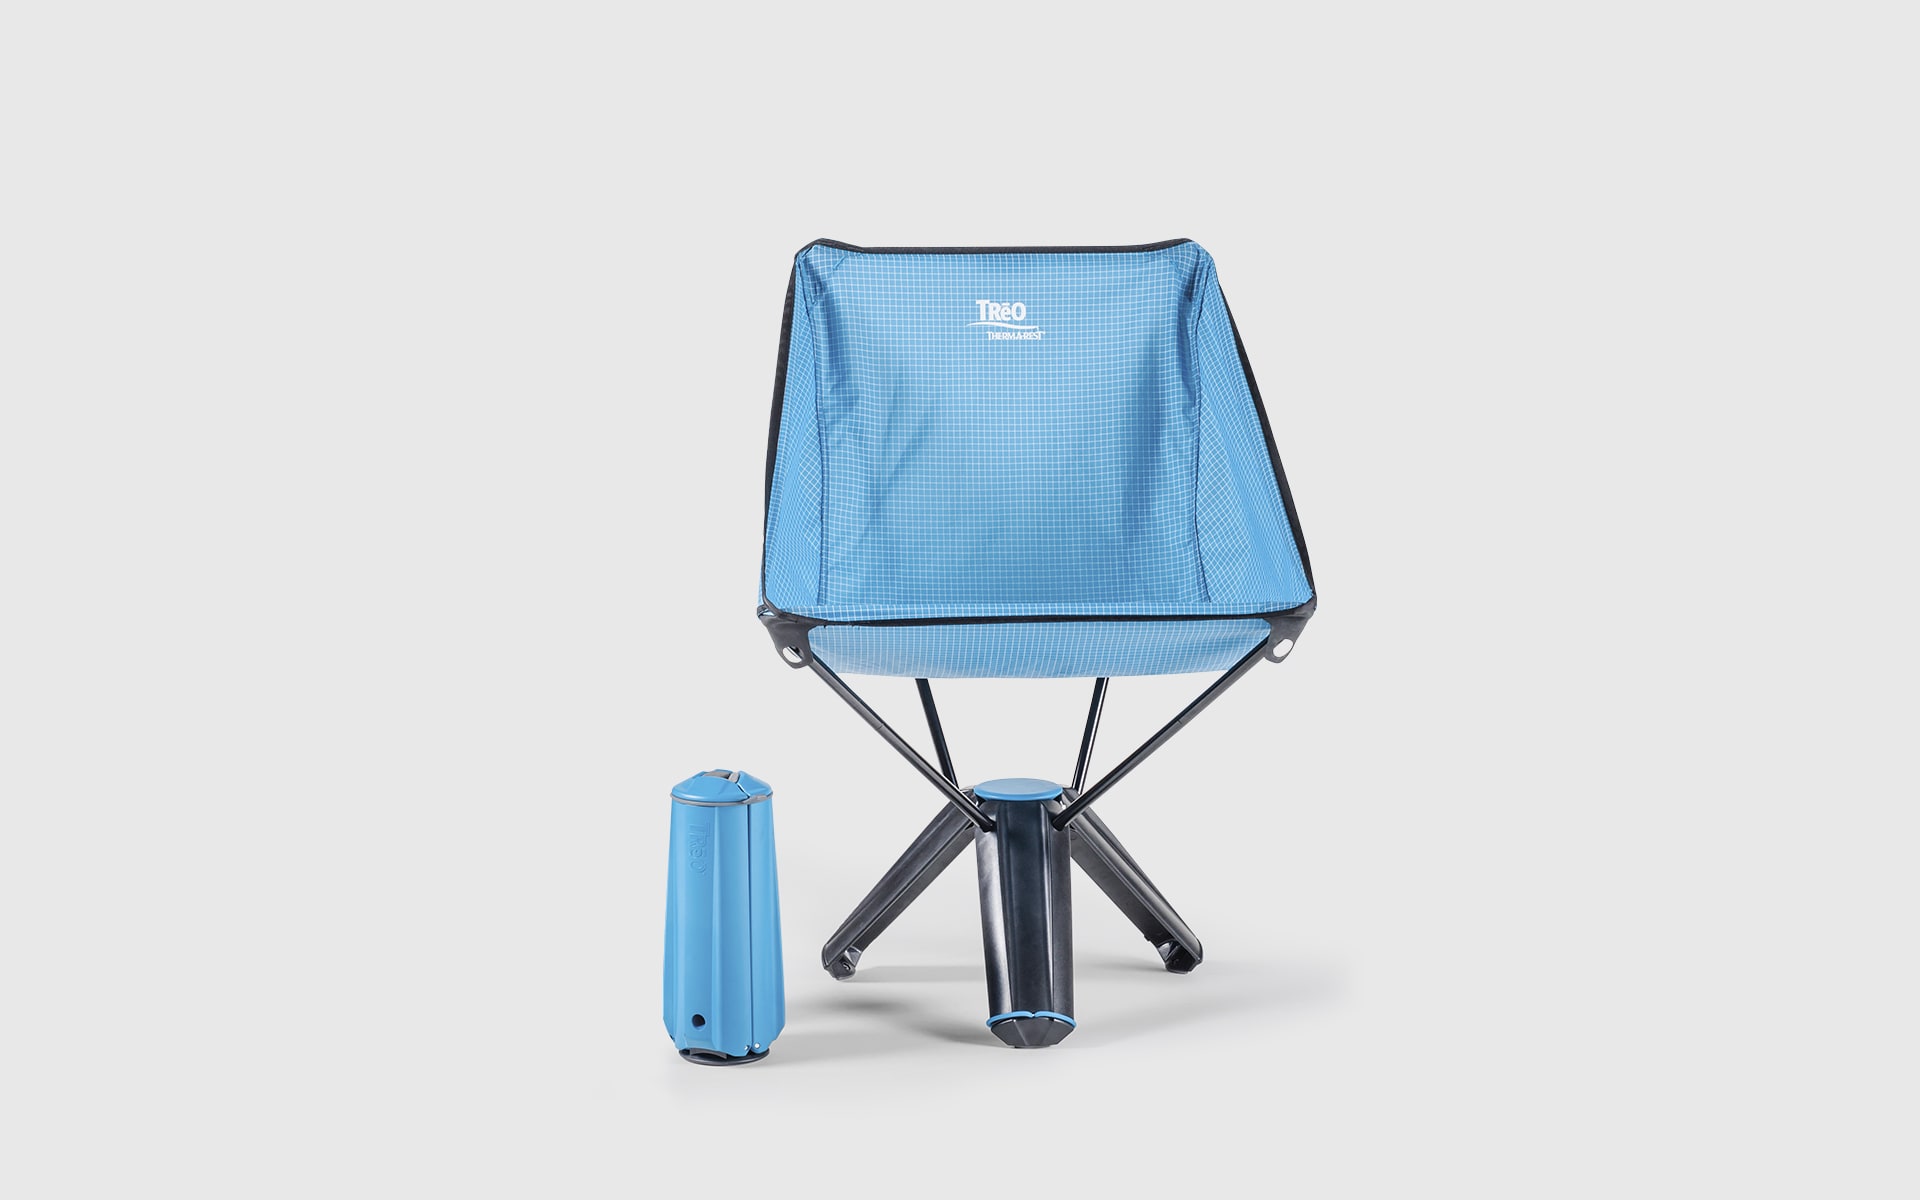 Collapsable outdoor chair Therm-a-Rest Treo by ITO Design in blue